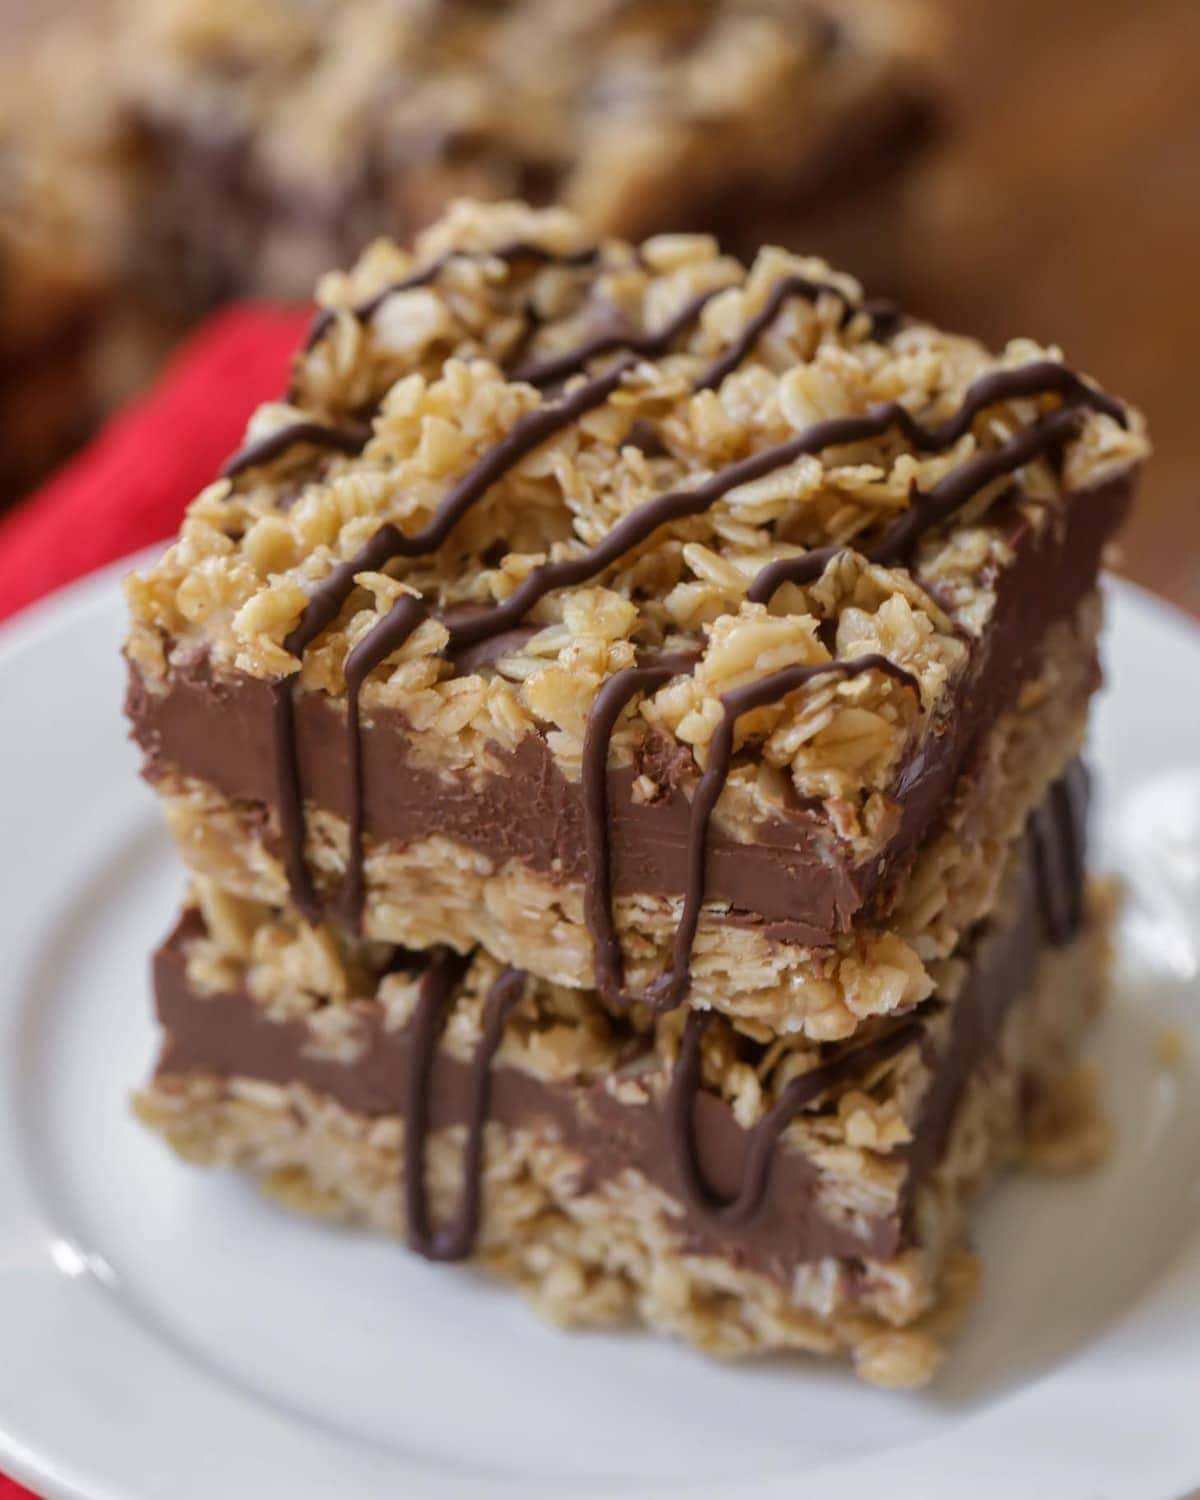 Cookie bar recipes - no bake chocolate oat bars drizzled with chocolate and stacked on a white plate.